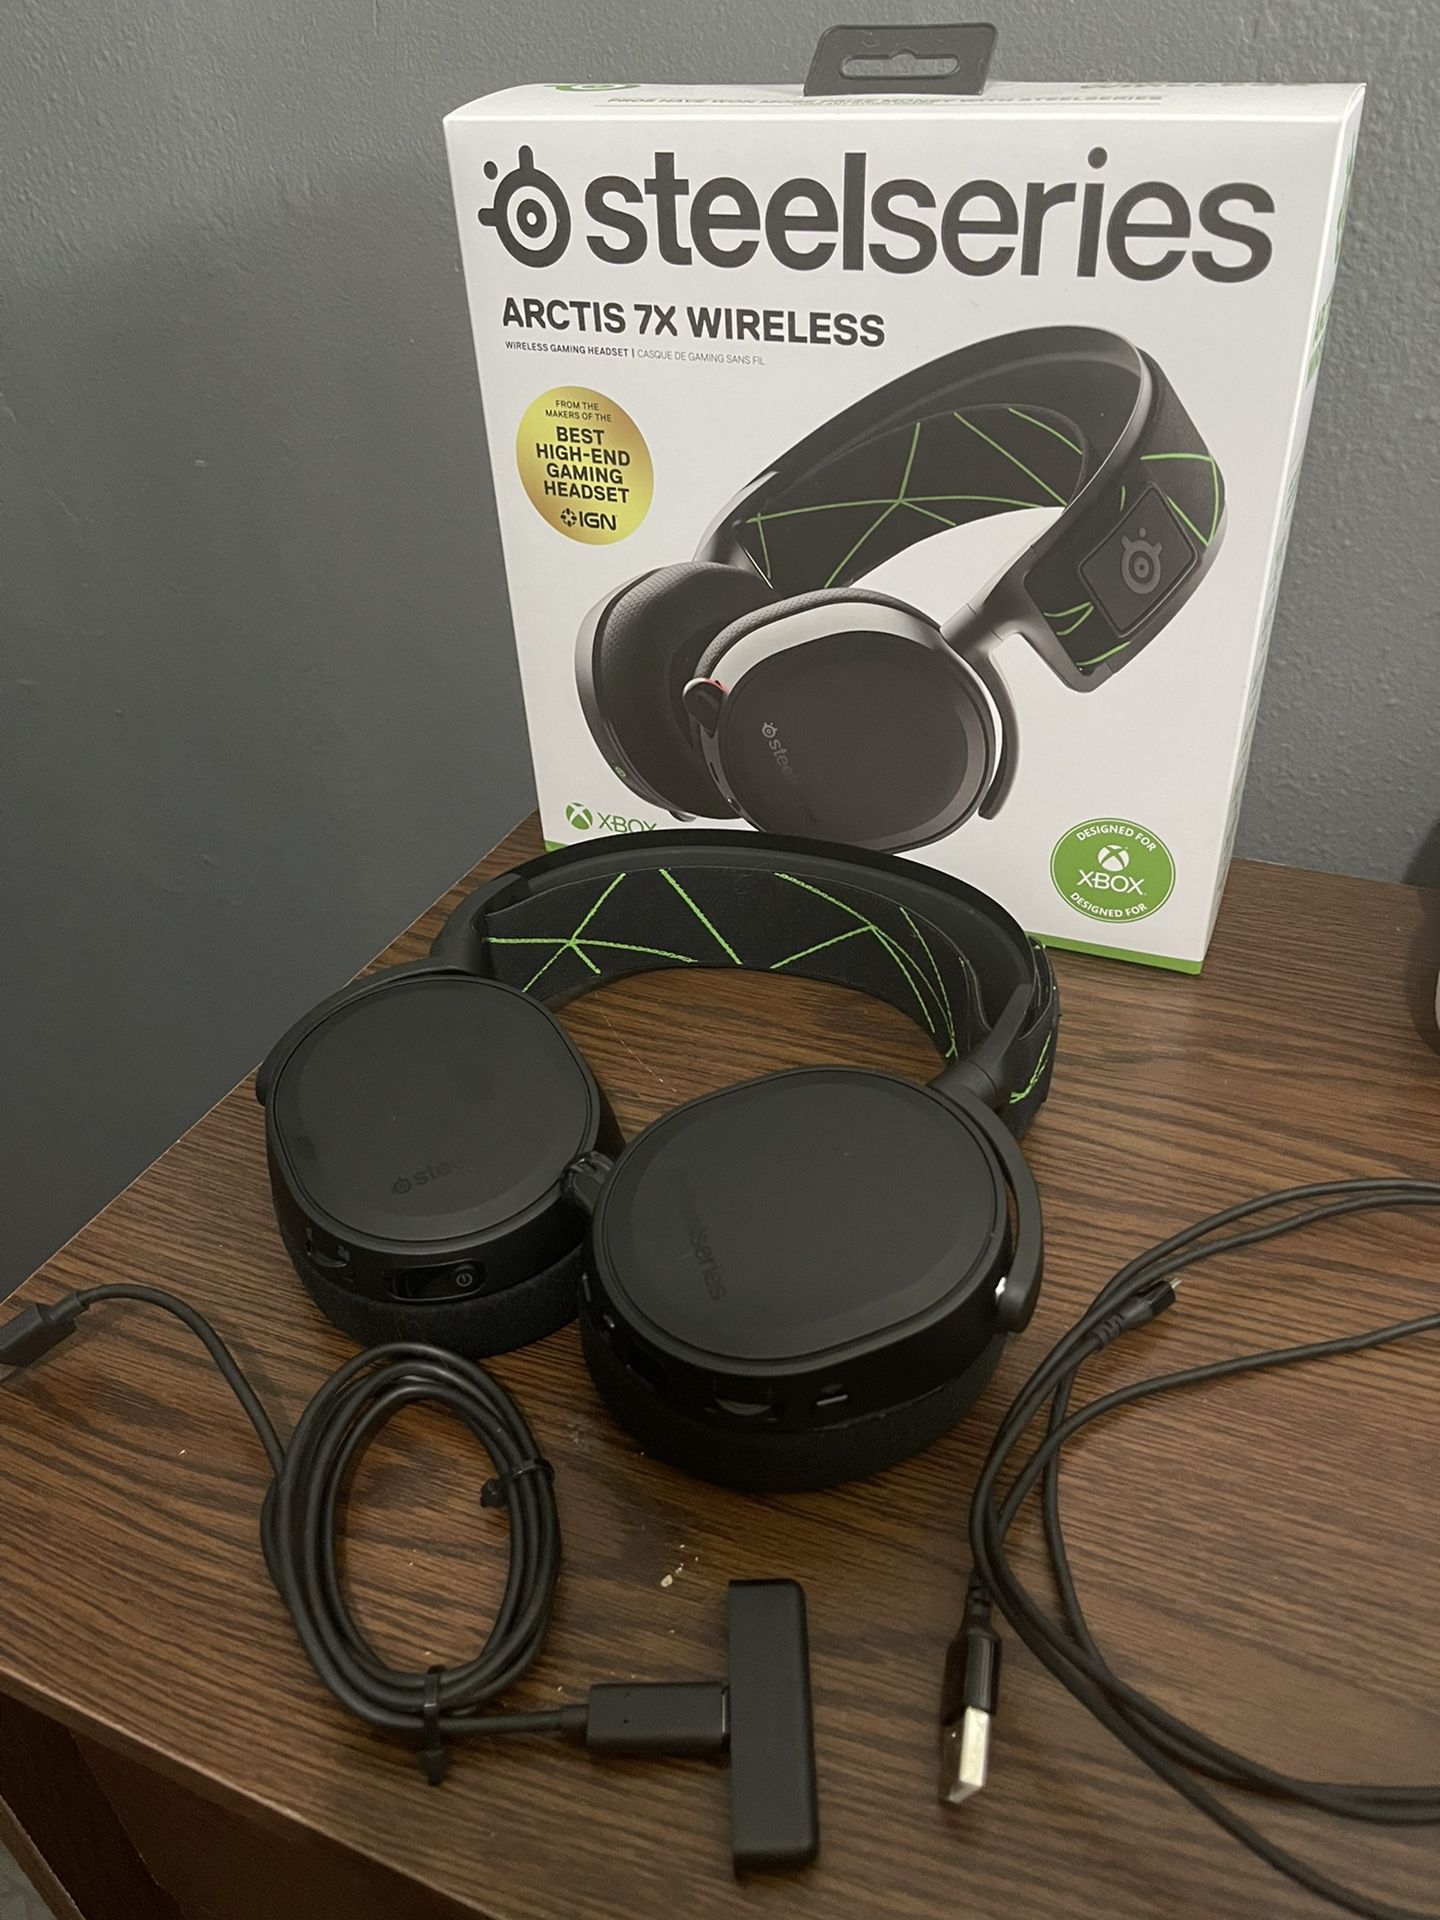 Barely used steel series 7x Headset!